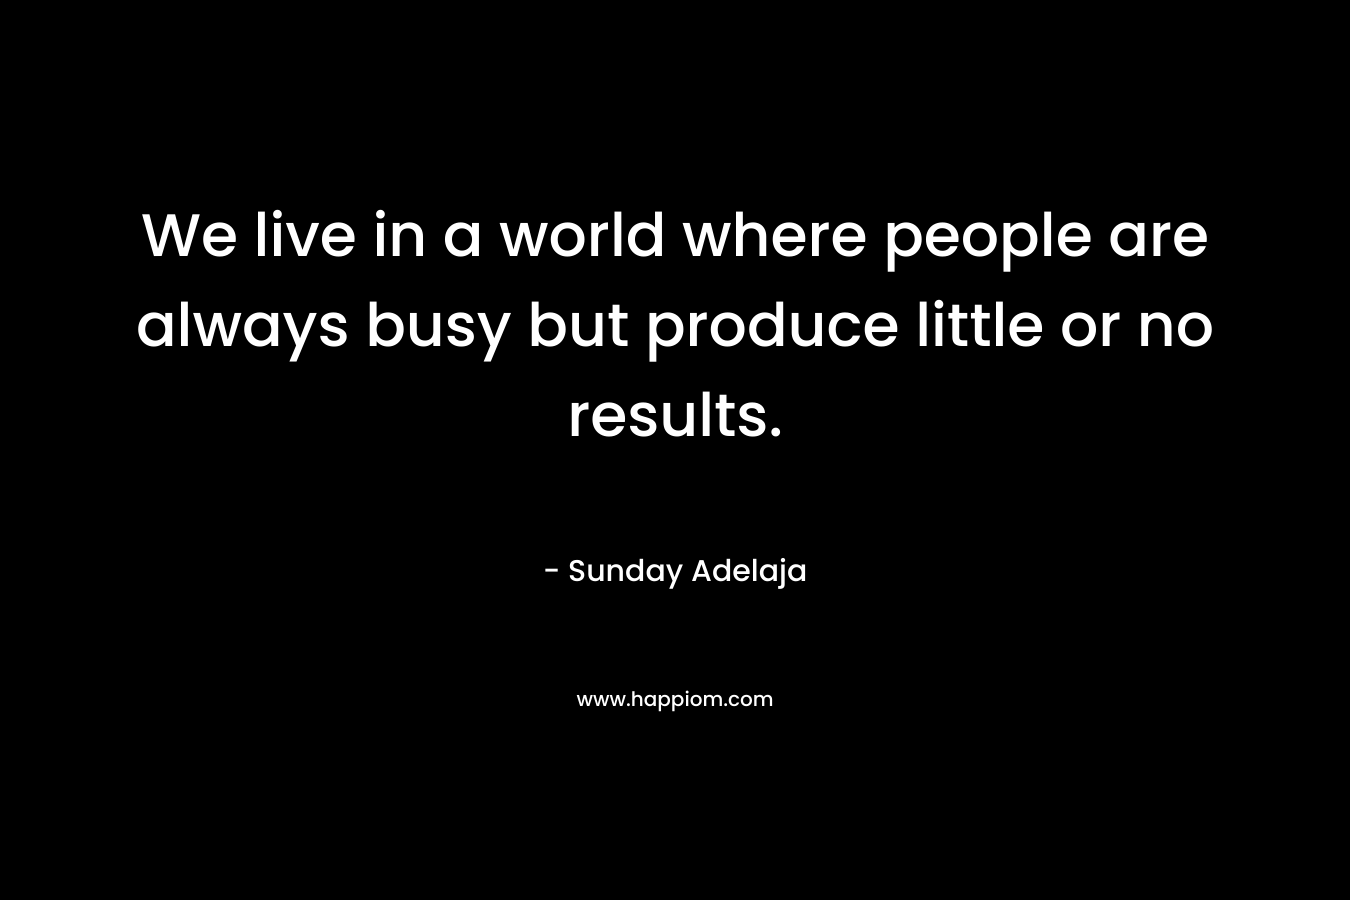 We live in a world where people are always busy but produce little or no results.